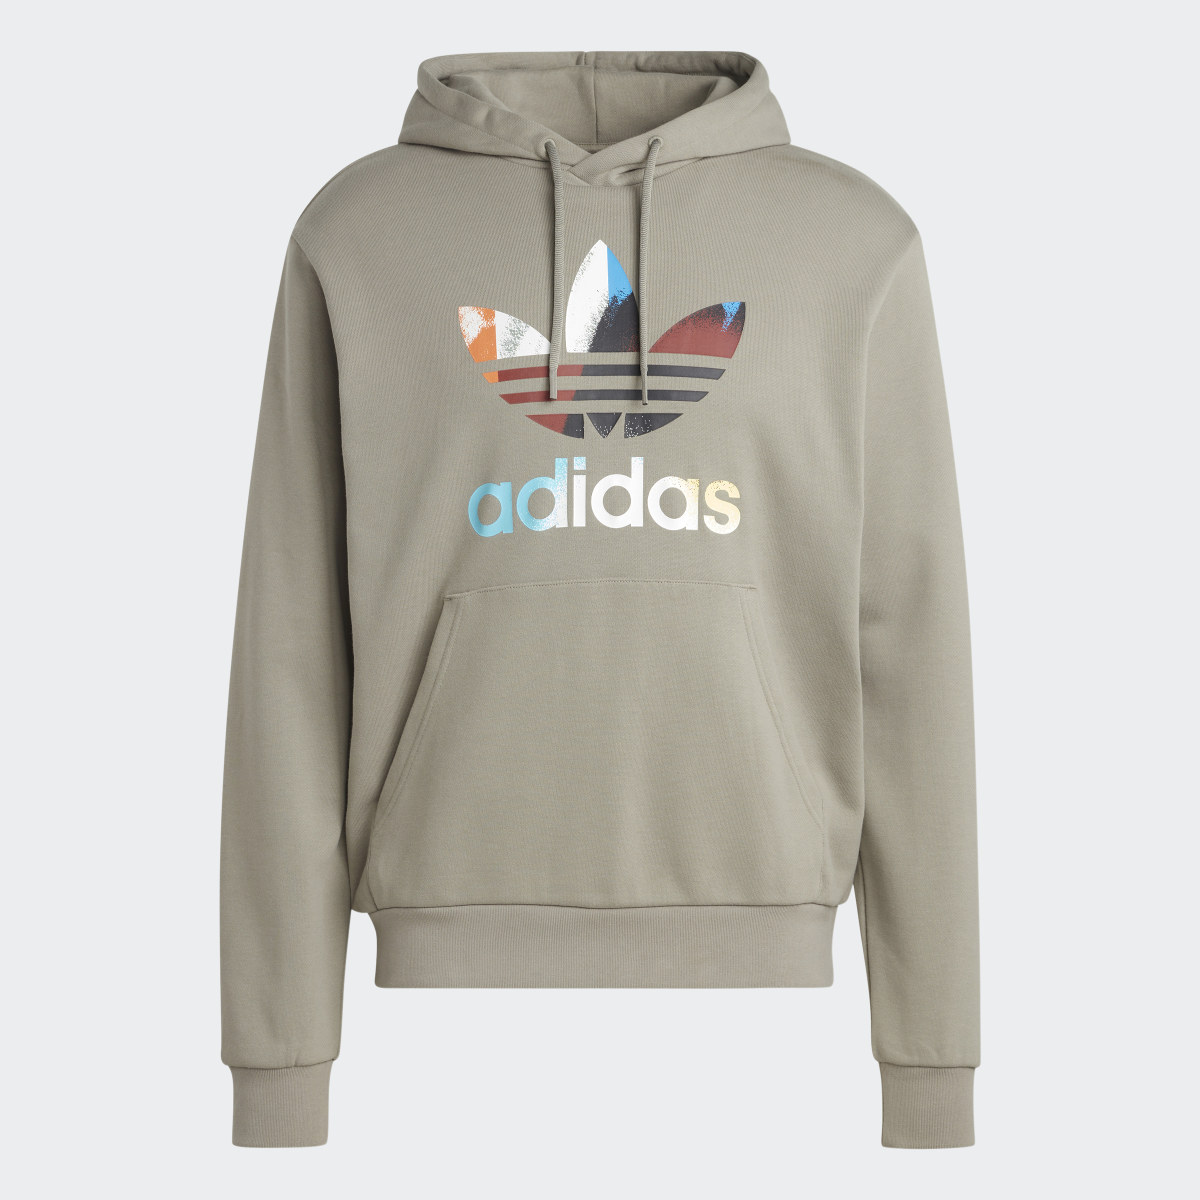 Adidas Graphics off the Grid Hoodie. 5